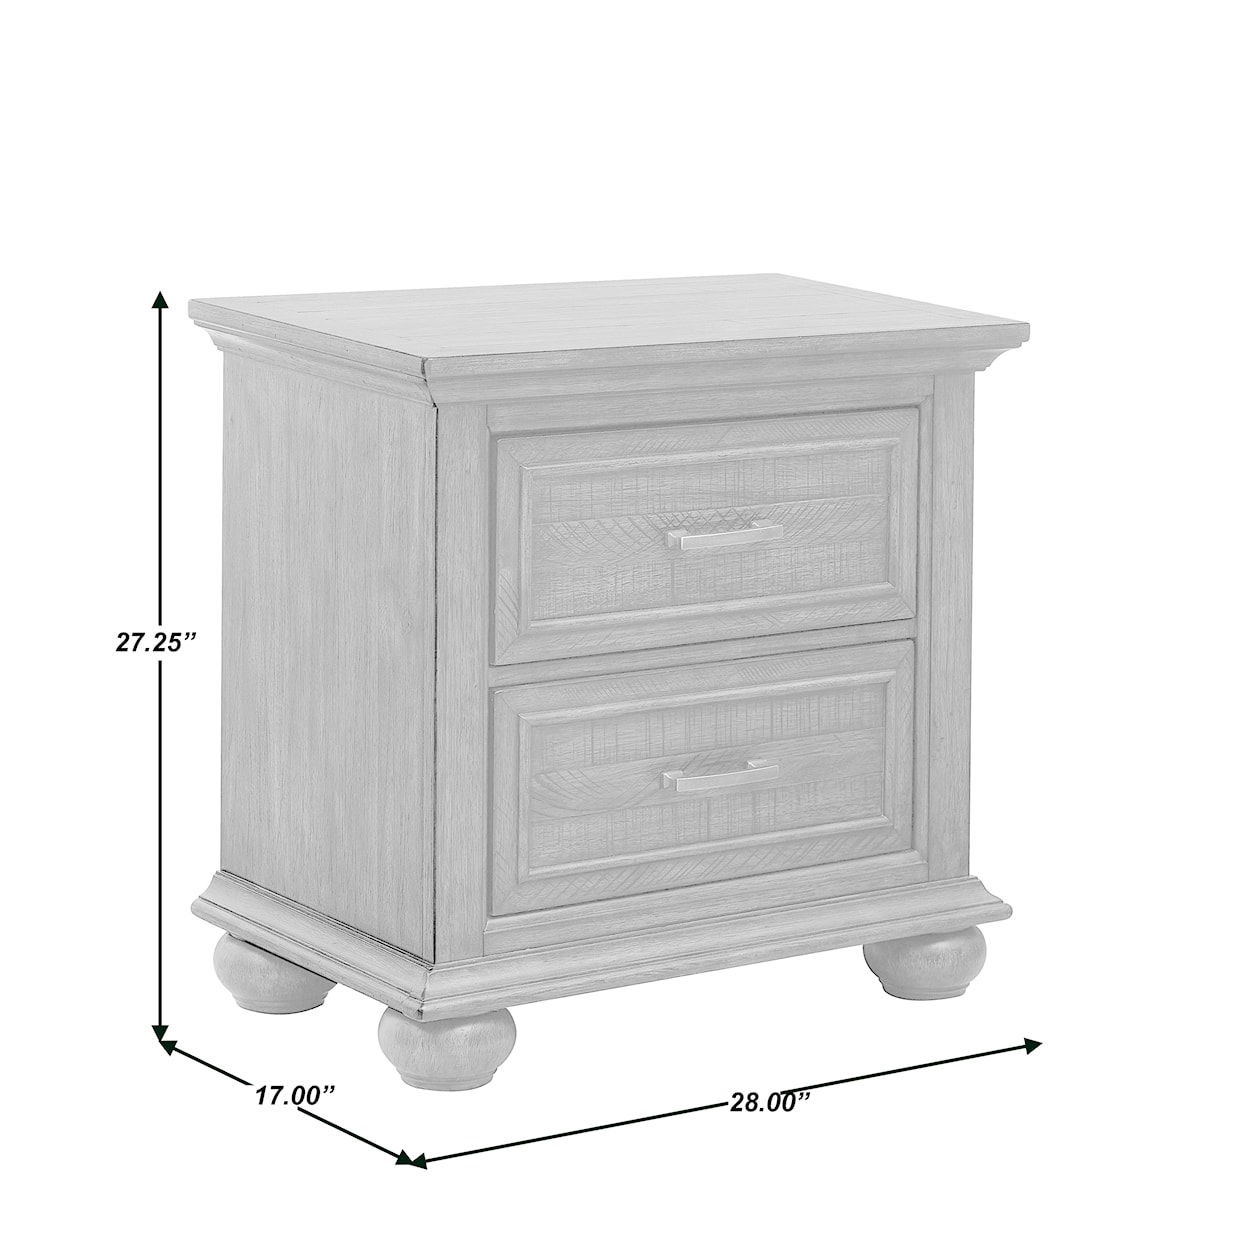 Samuel Lawrence Chatham Park Paneled Wooden 2 Drawer Nightstand